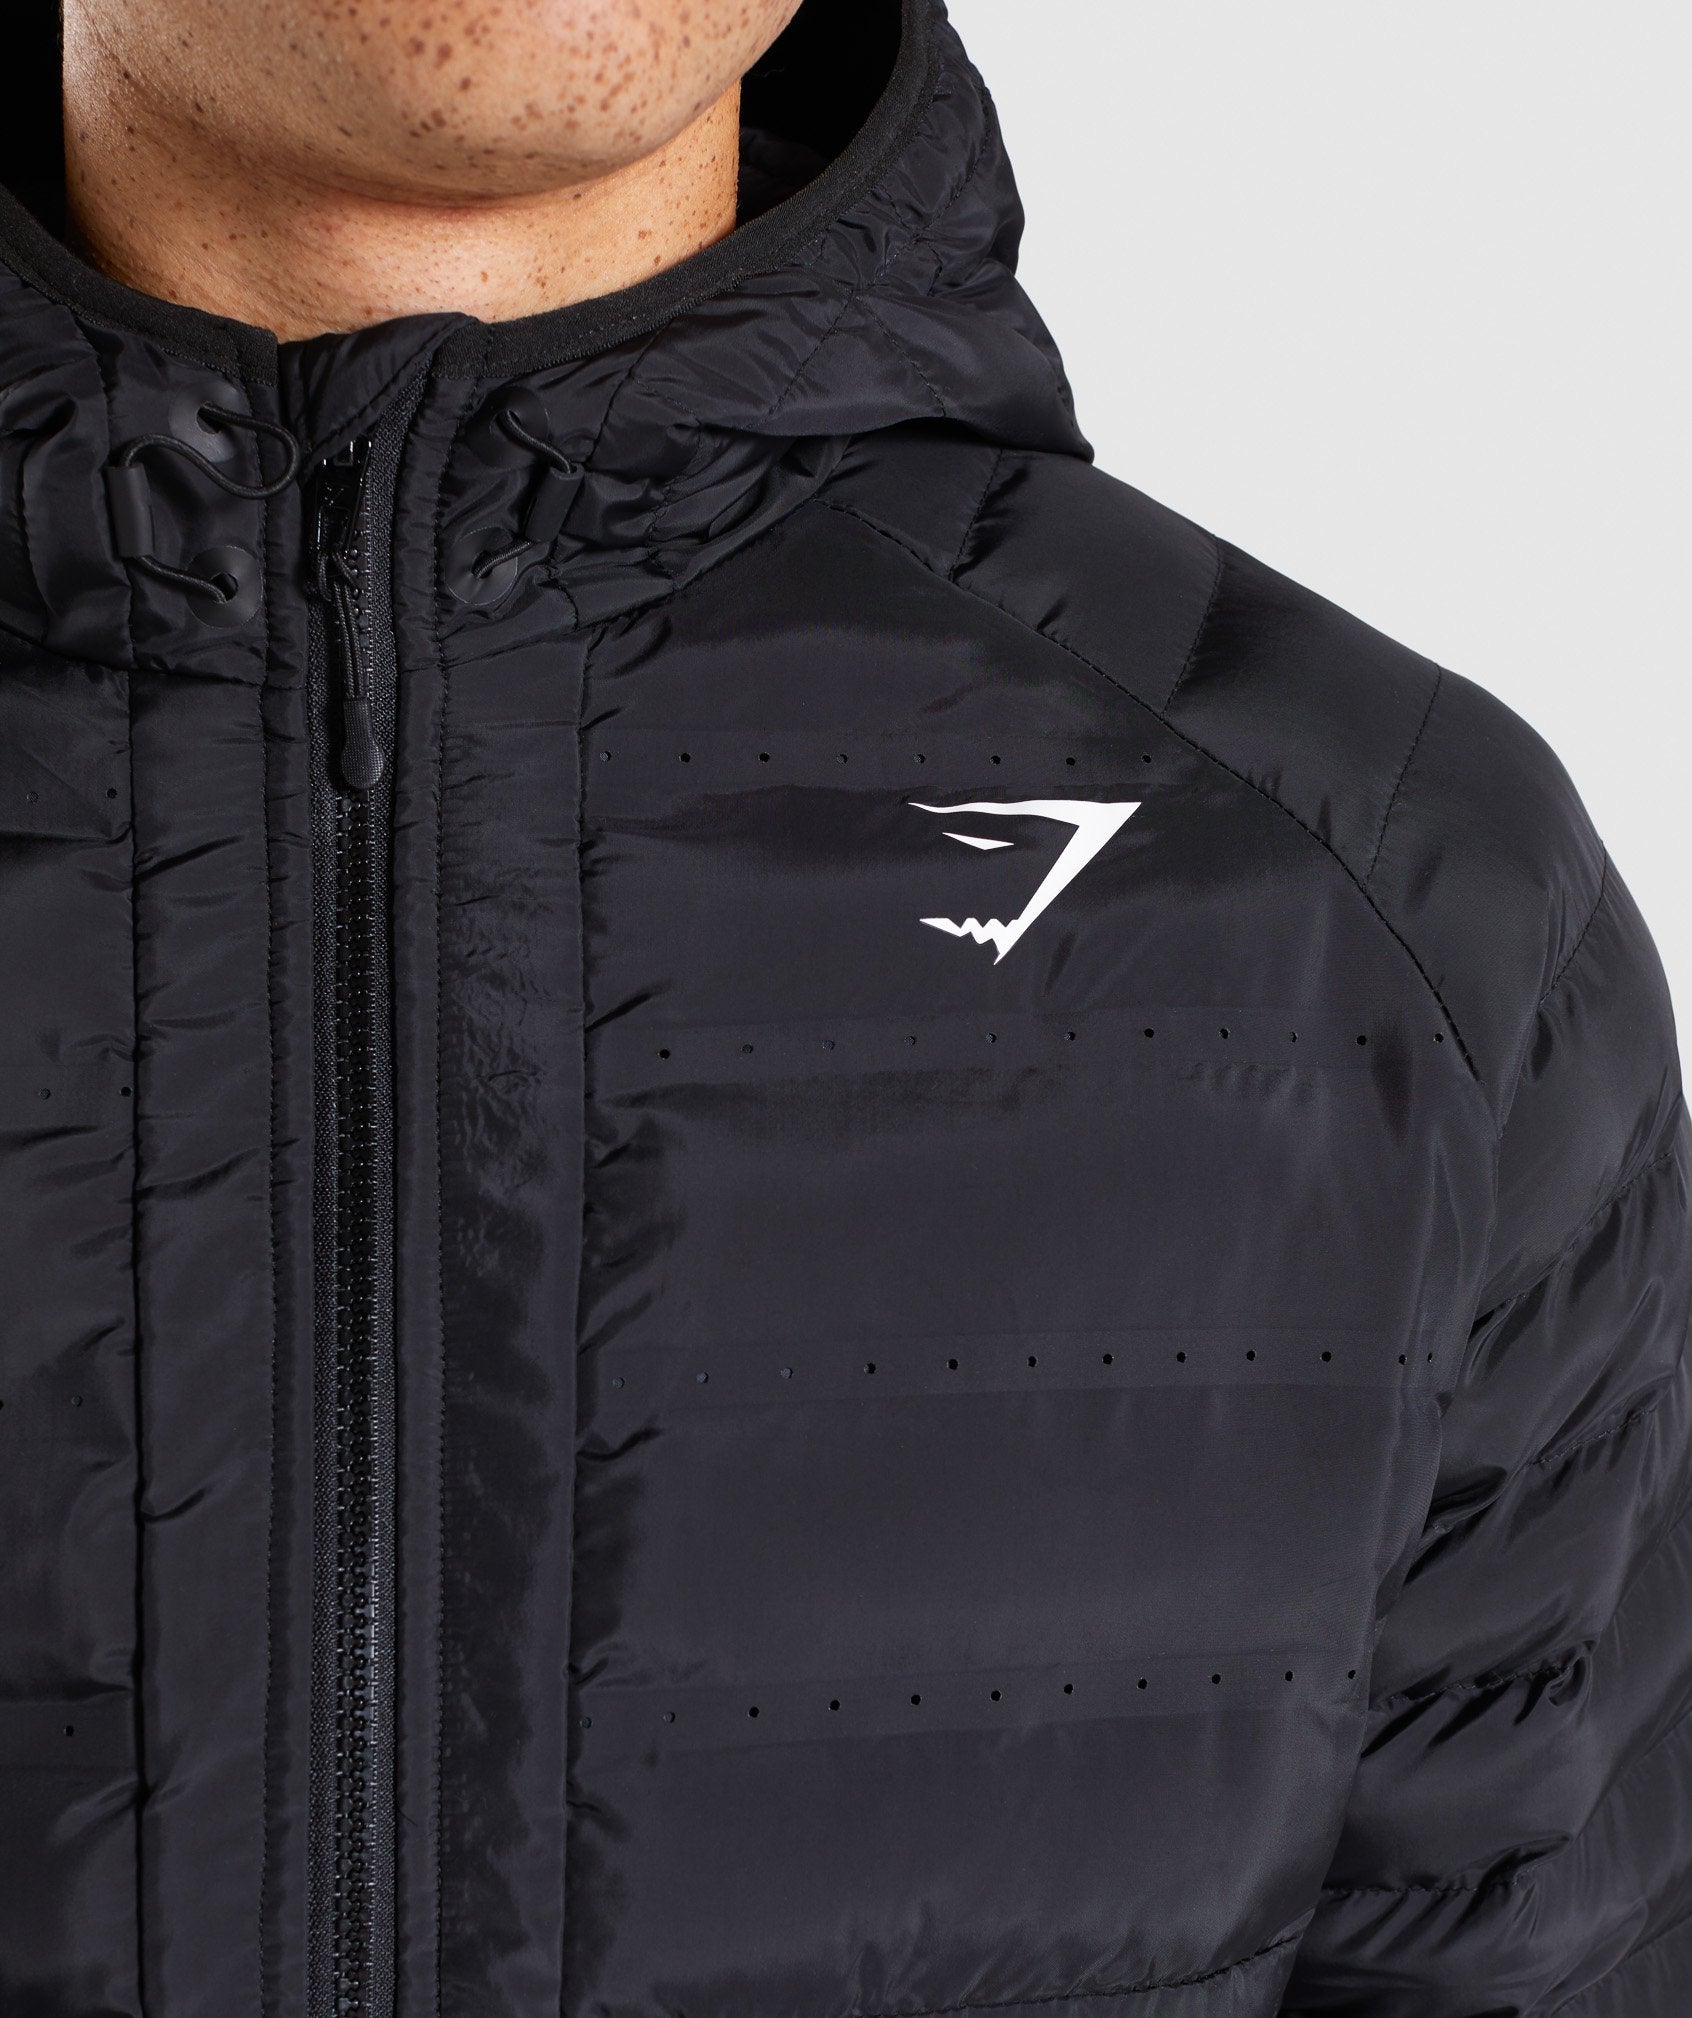 Sector Jacket V2 in Black - view 6